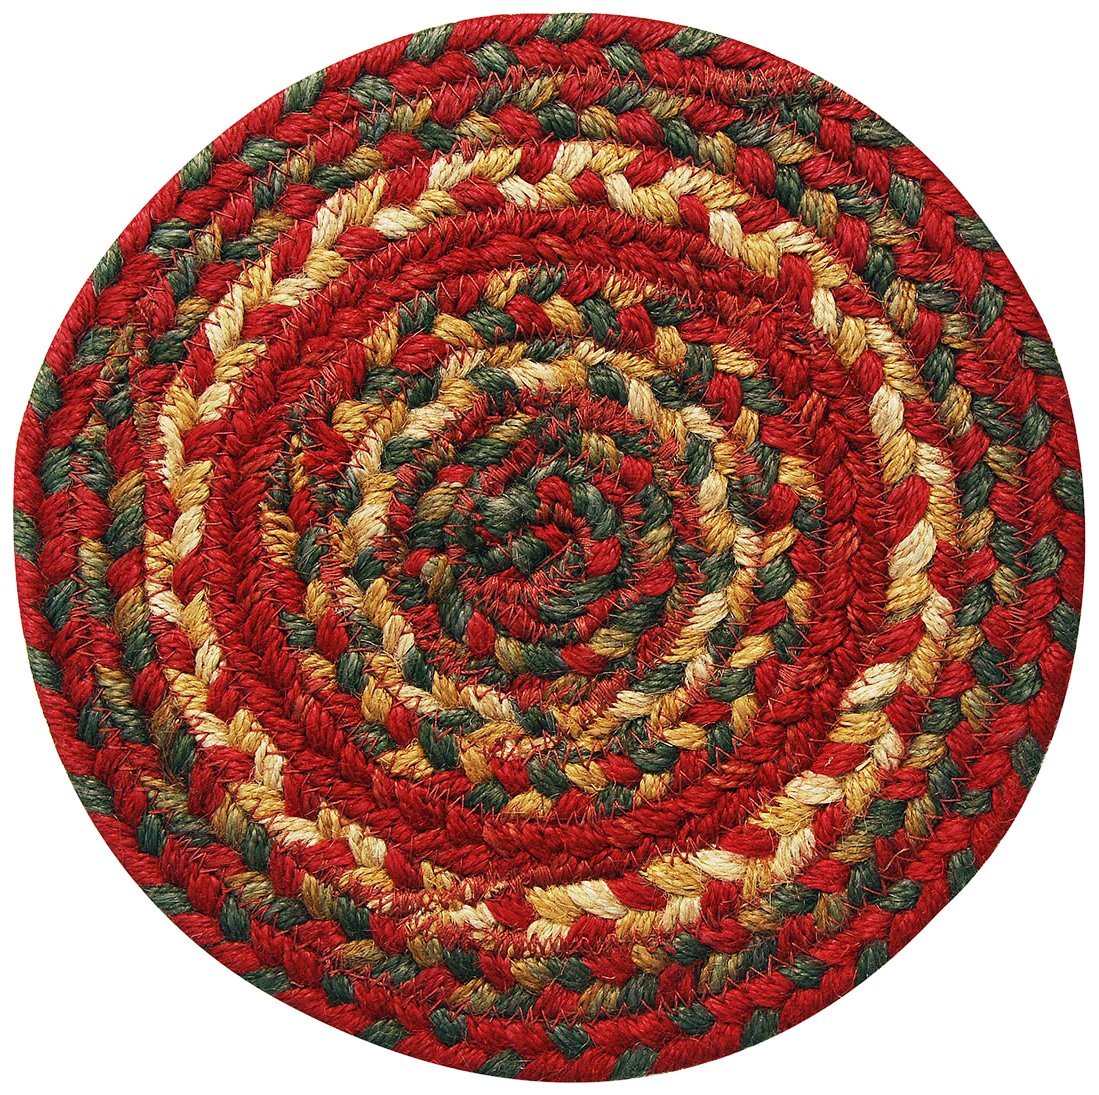 Picture of Homespice Decor 593122 Cider Barn Hudson Jute Braided Rugs - Trivet - Round - set of 6